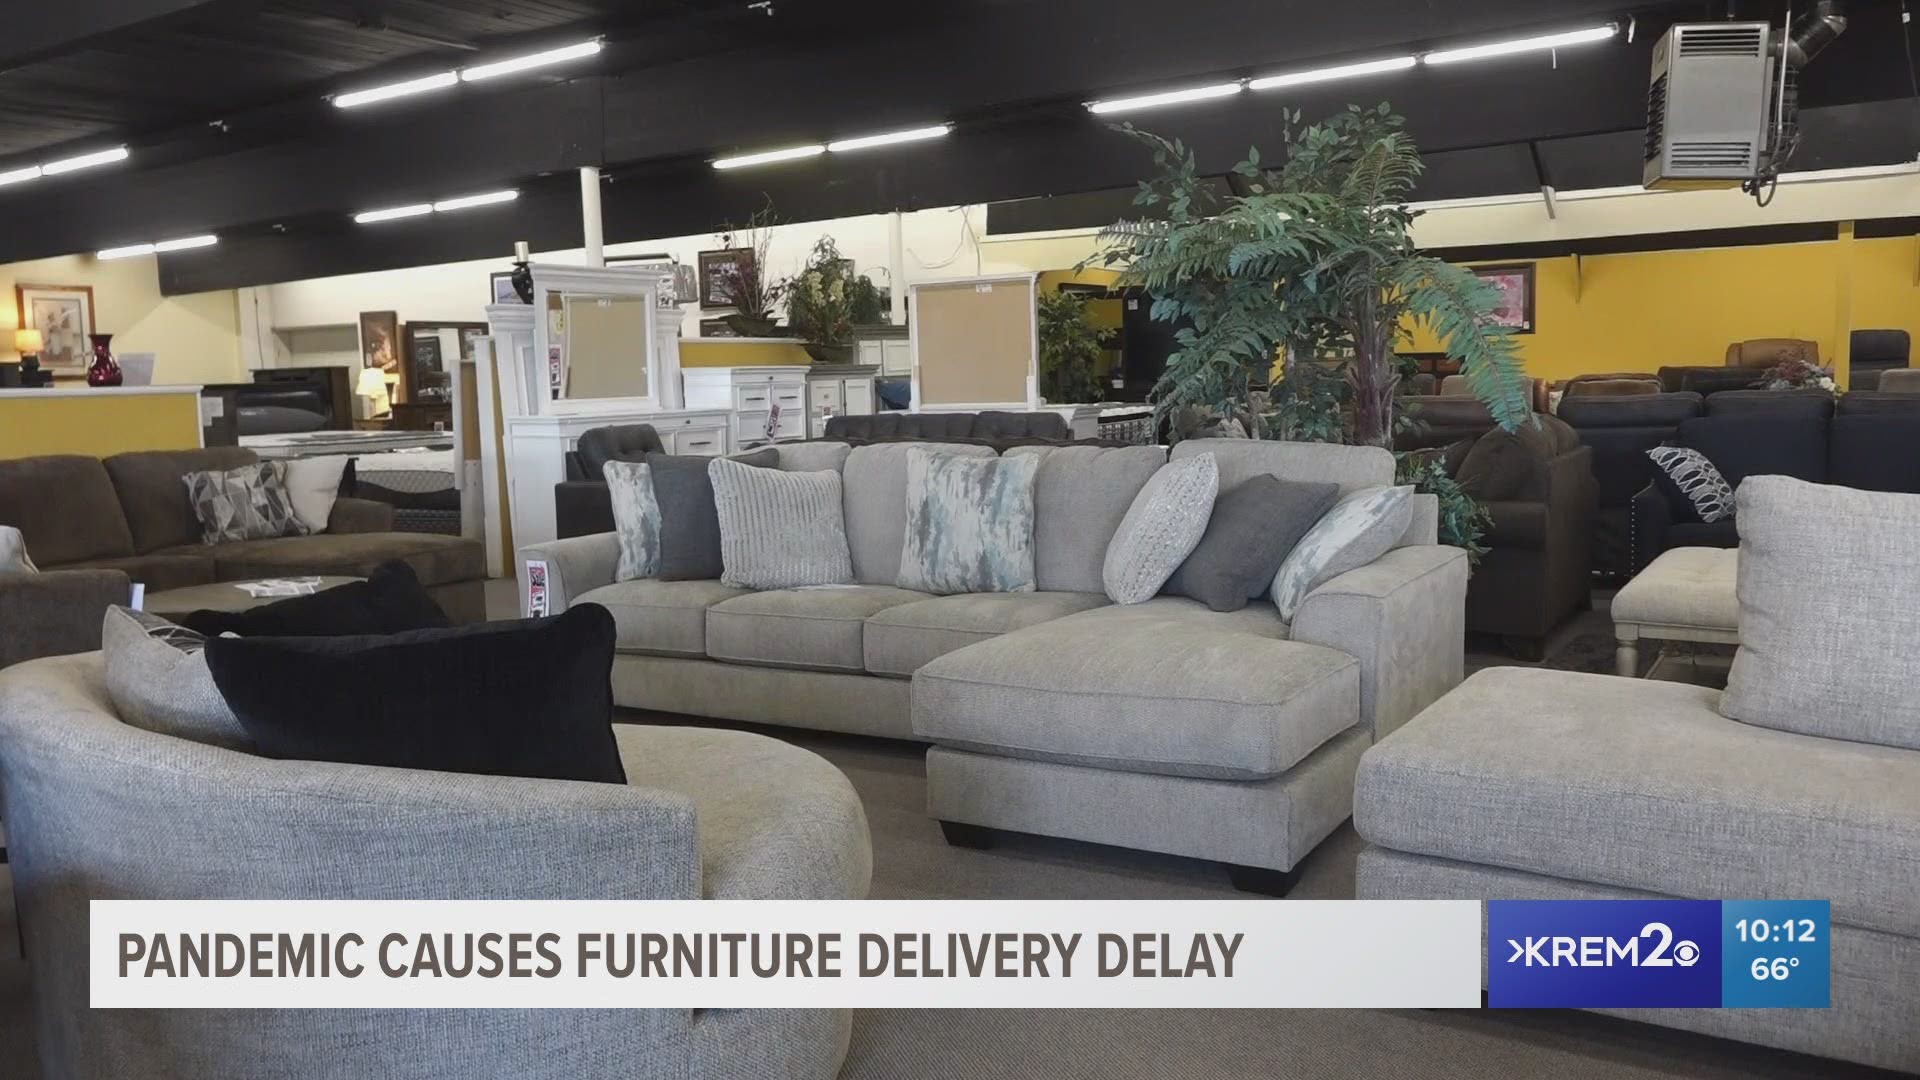 KREM's Amanda Roley talks with furniture store owners and customers about the delays.